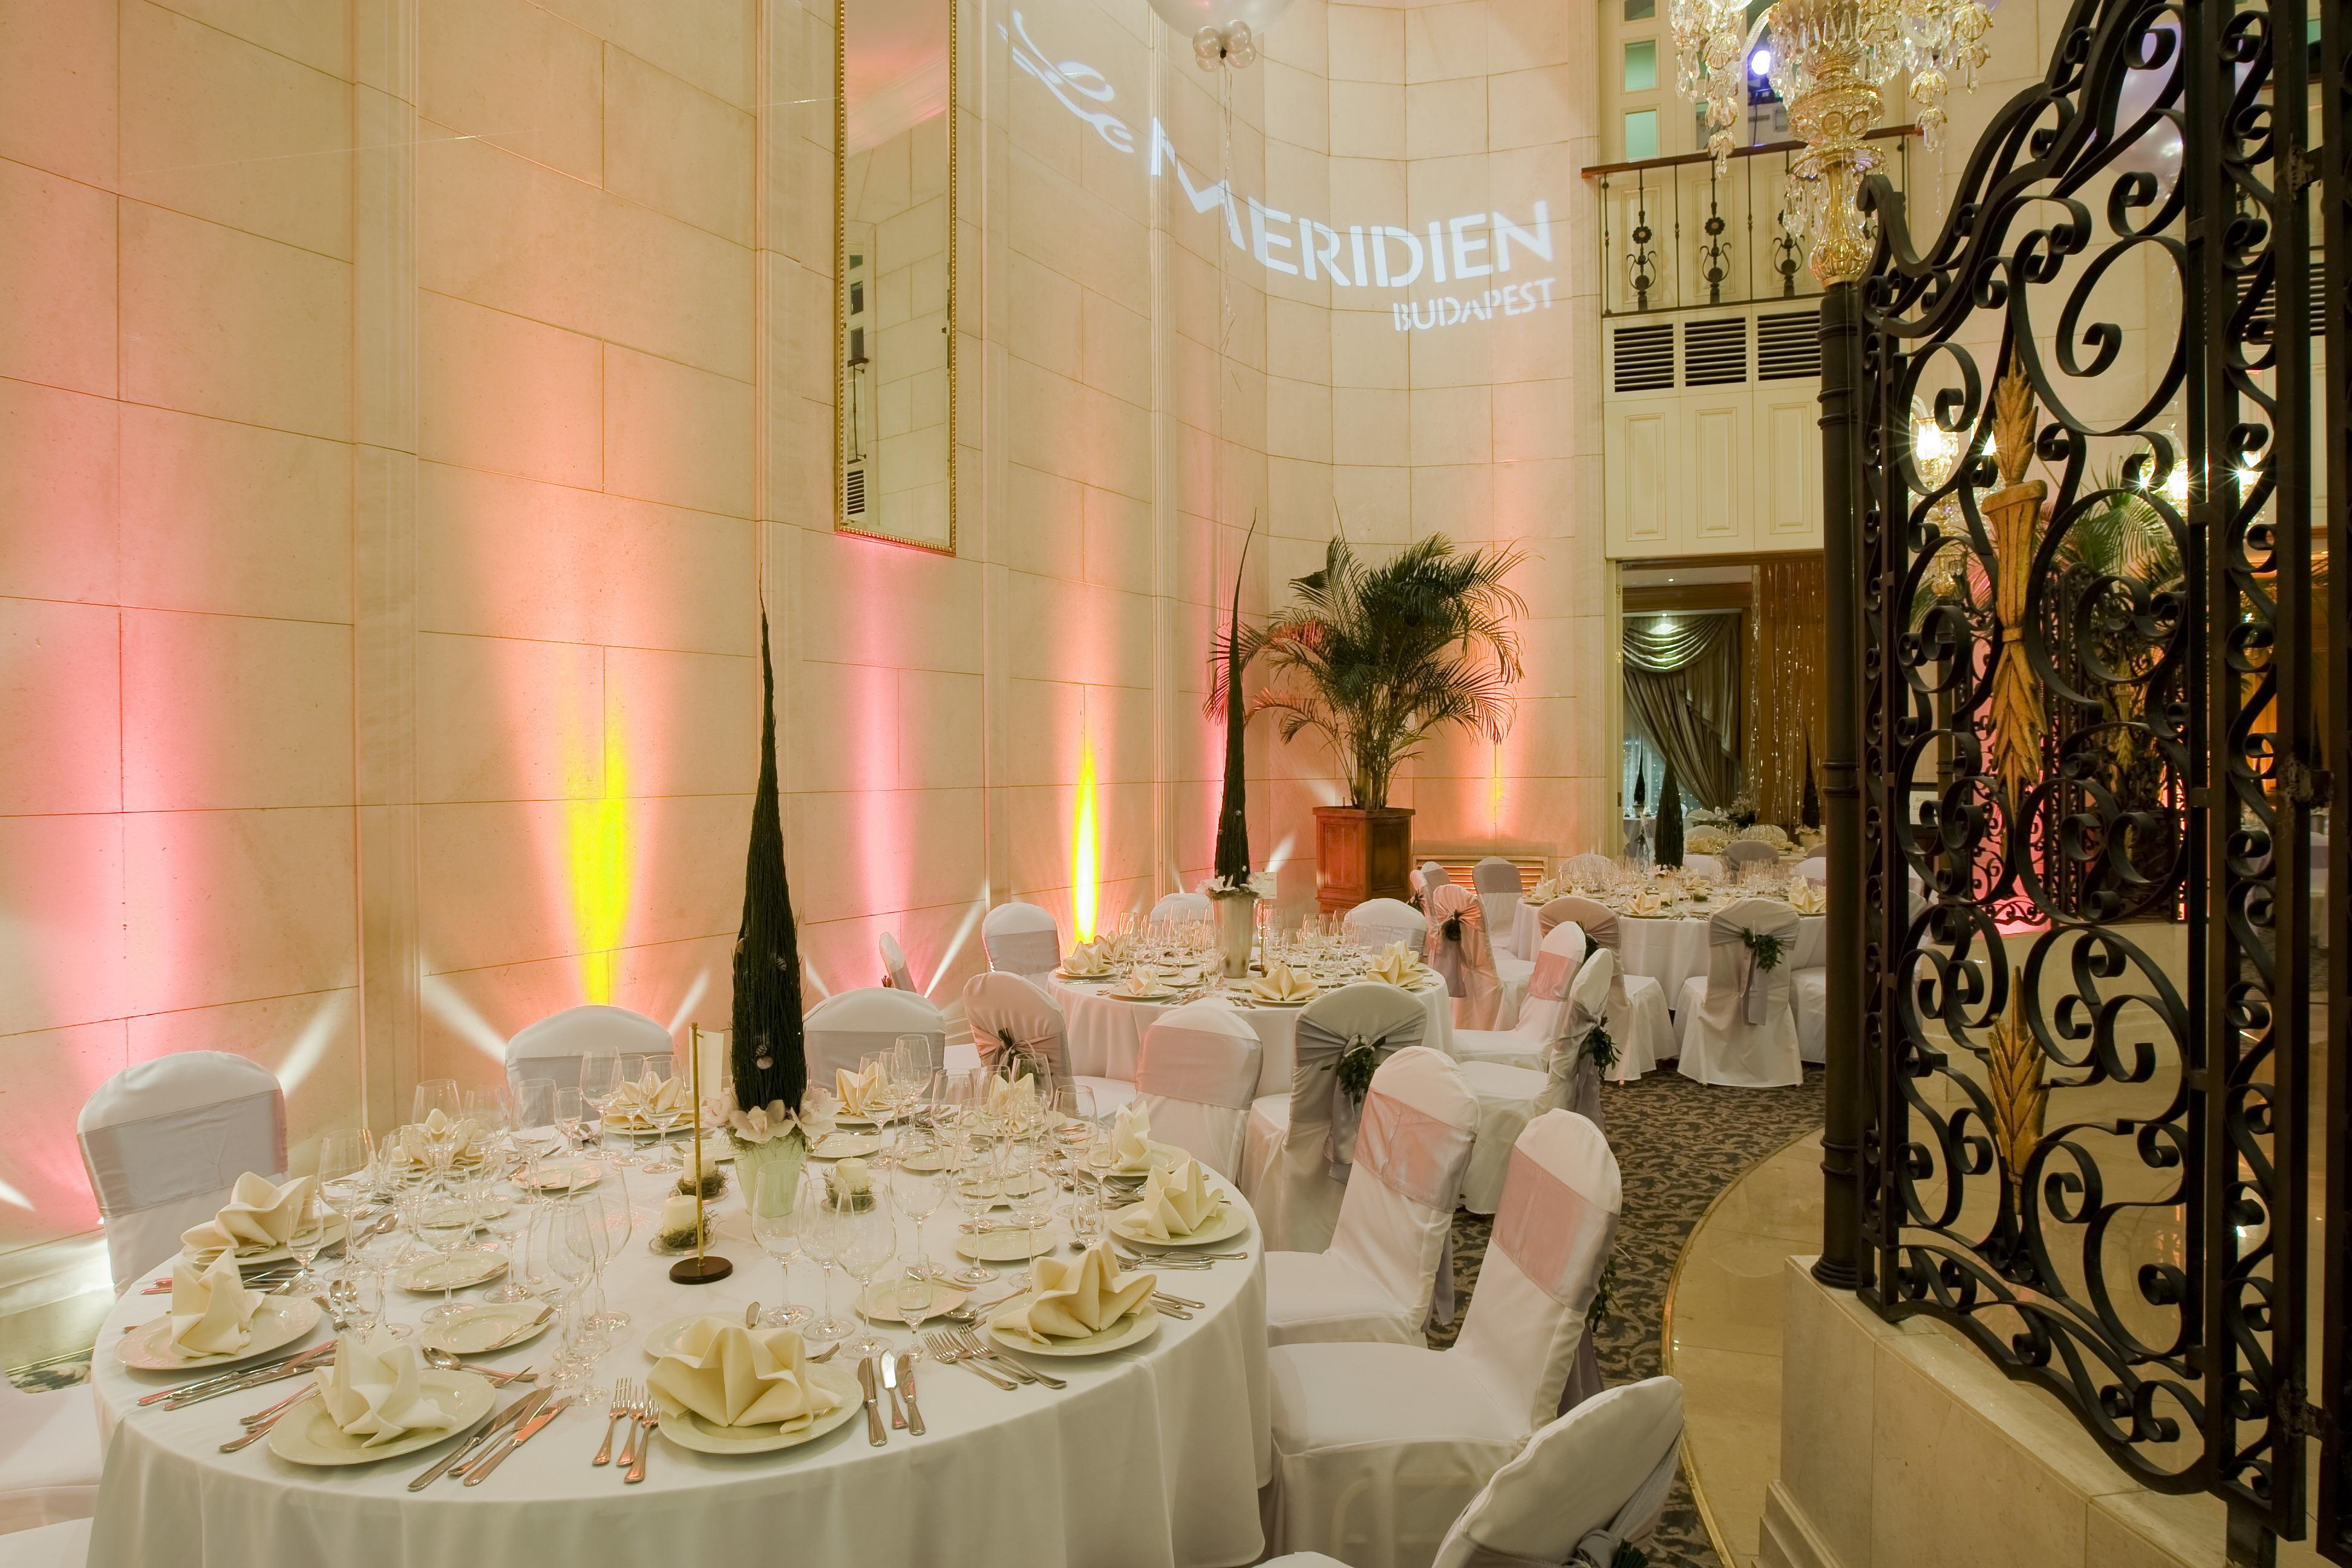 New Year's Eve Party At Le Meridien Budapest